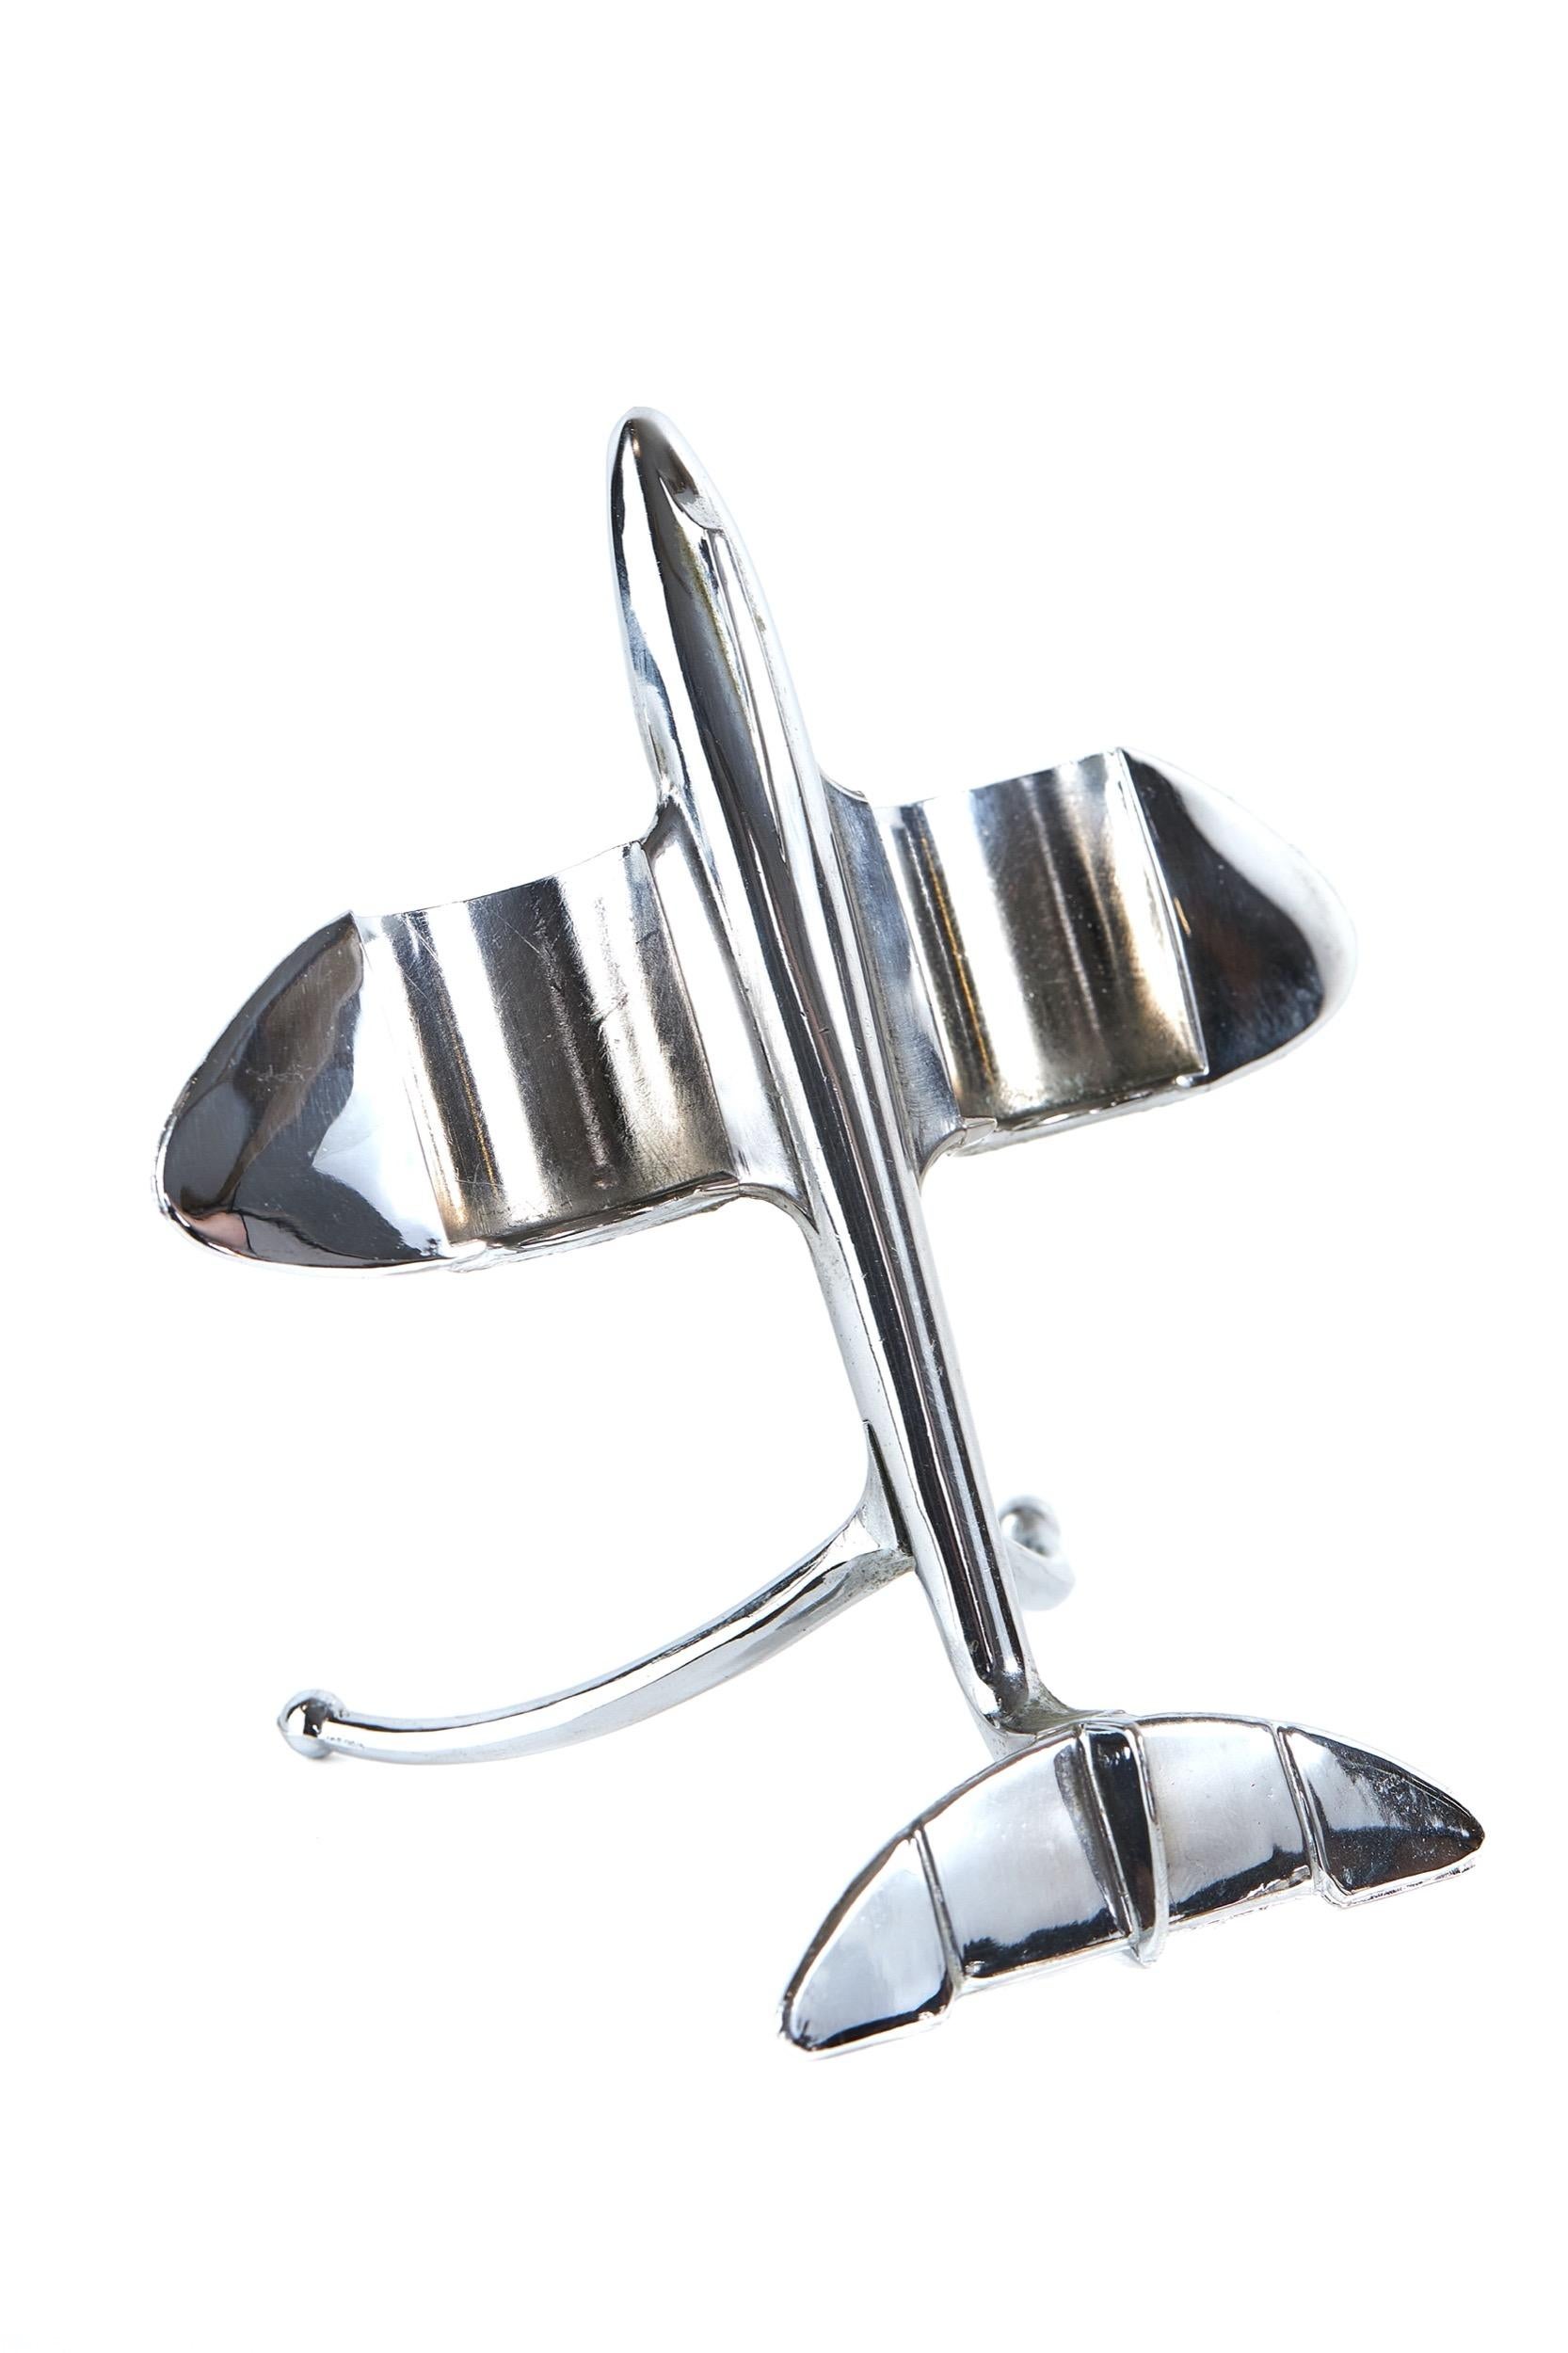 Vintage Chrome Jet plane Cruet set 
circa 1950
Chrome plated body , 
the wings shaped to hold Salt & Pepper pot , in form of the Jet engines, 
pots with pierced outer case detail. 
Bristol Blue glass linings, 
[no splits in top rims]
under plane